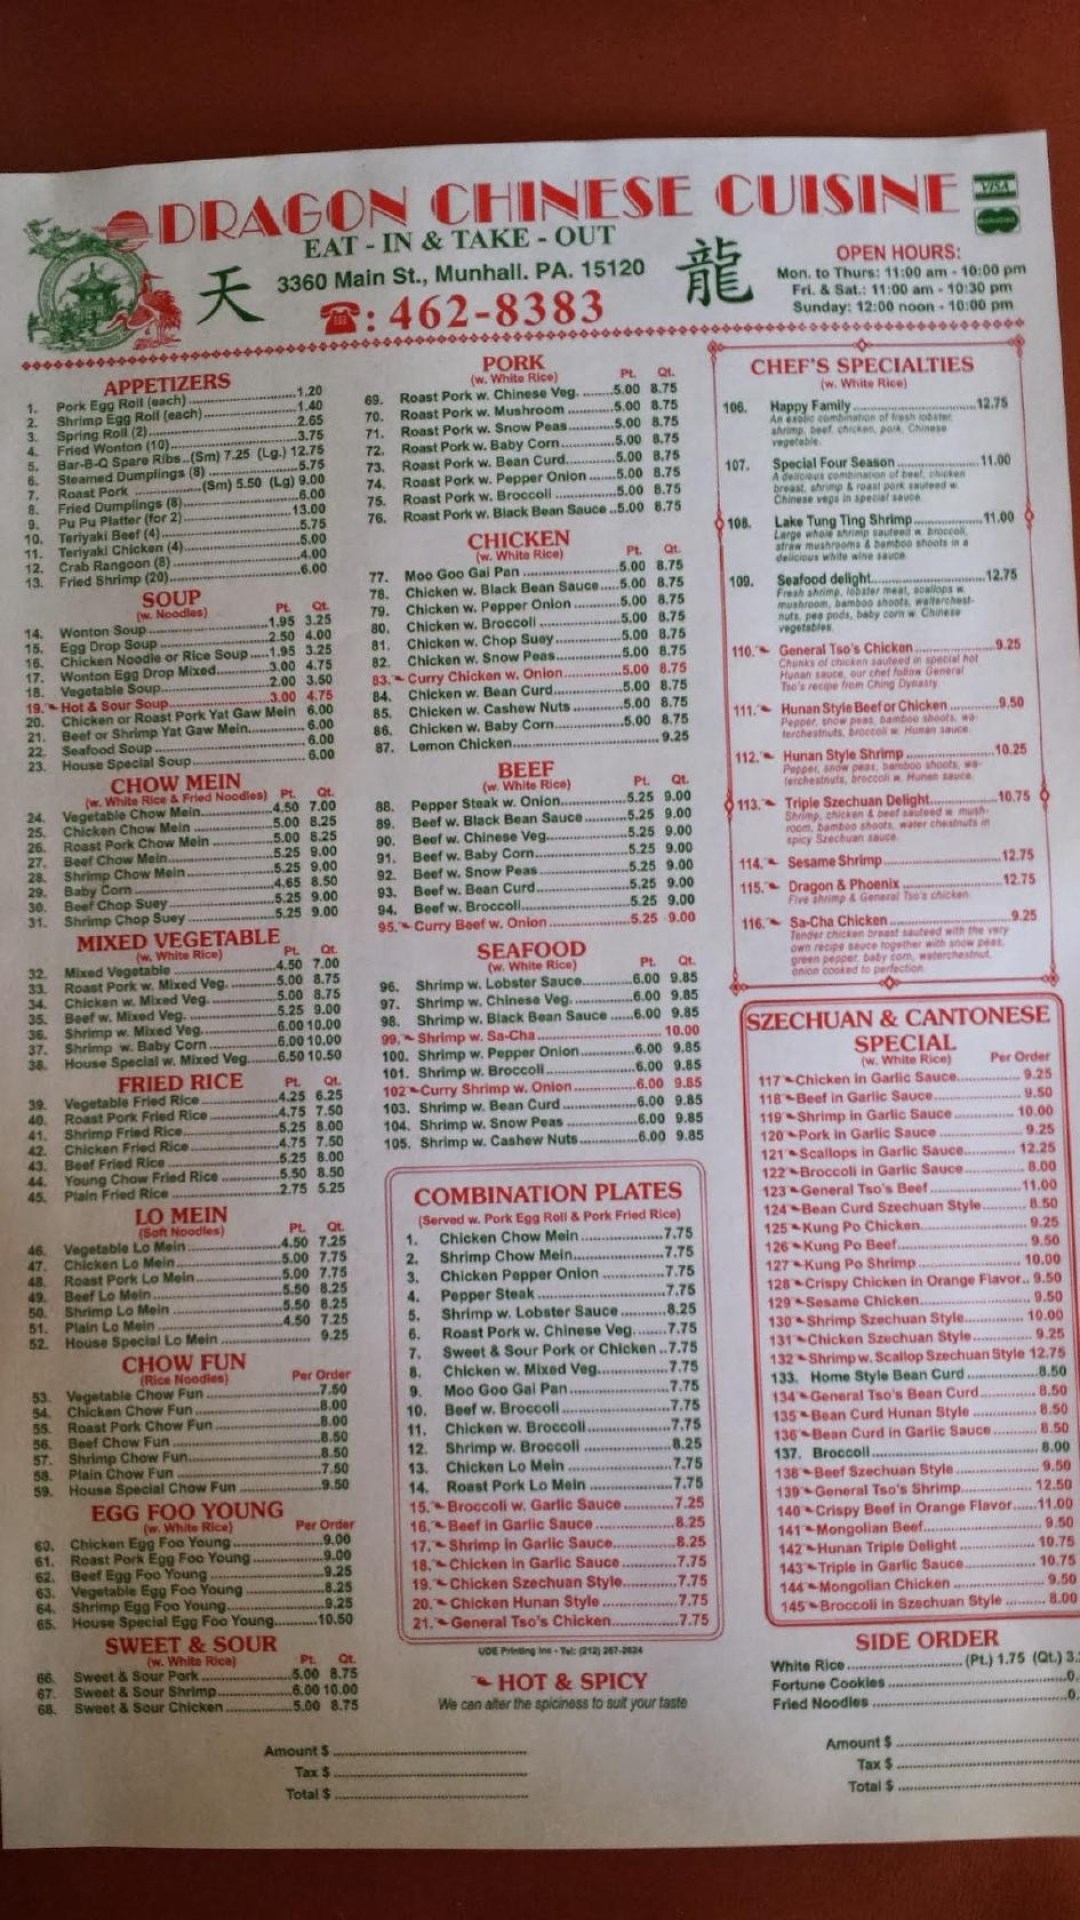 Picture of: Menu at Dragon Chinese Cuisine restaurant, Munhall